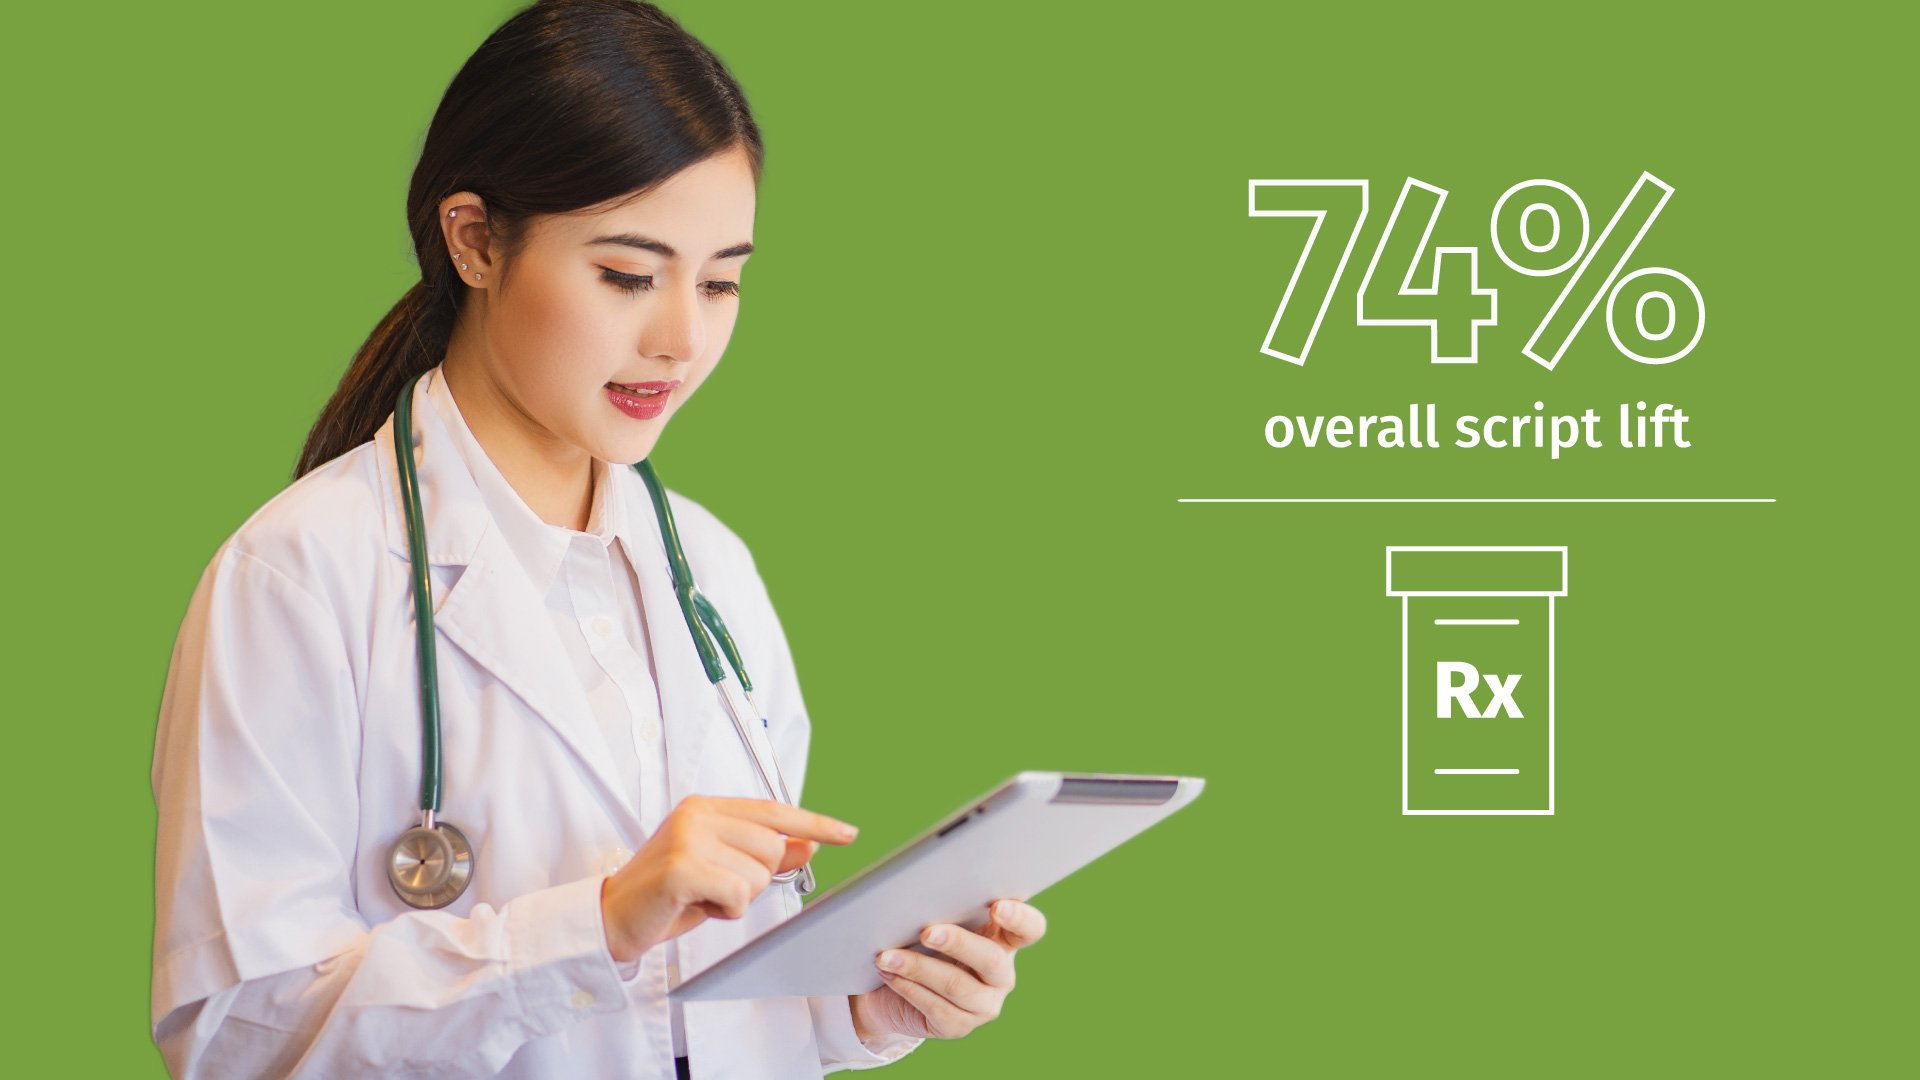 74% overall script lift female physician using technology